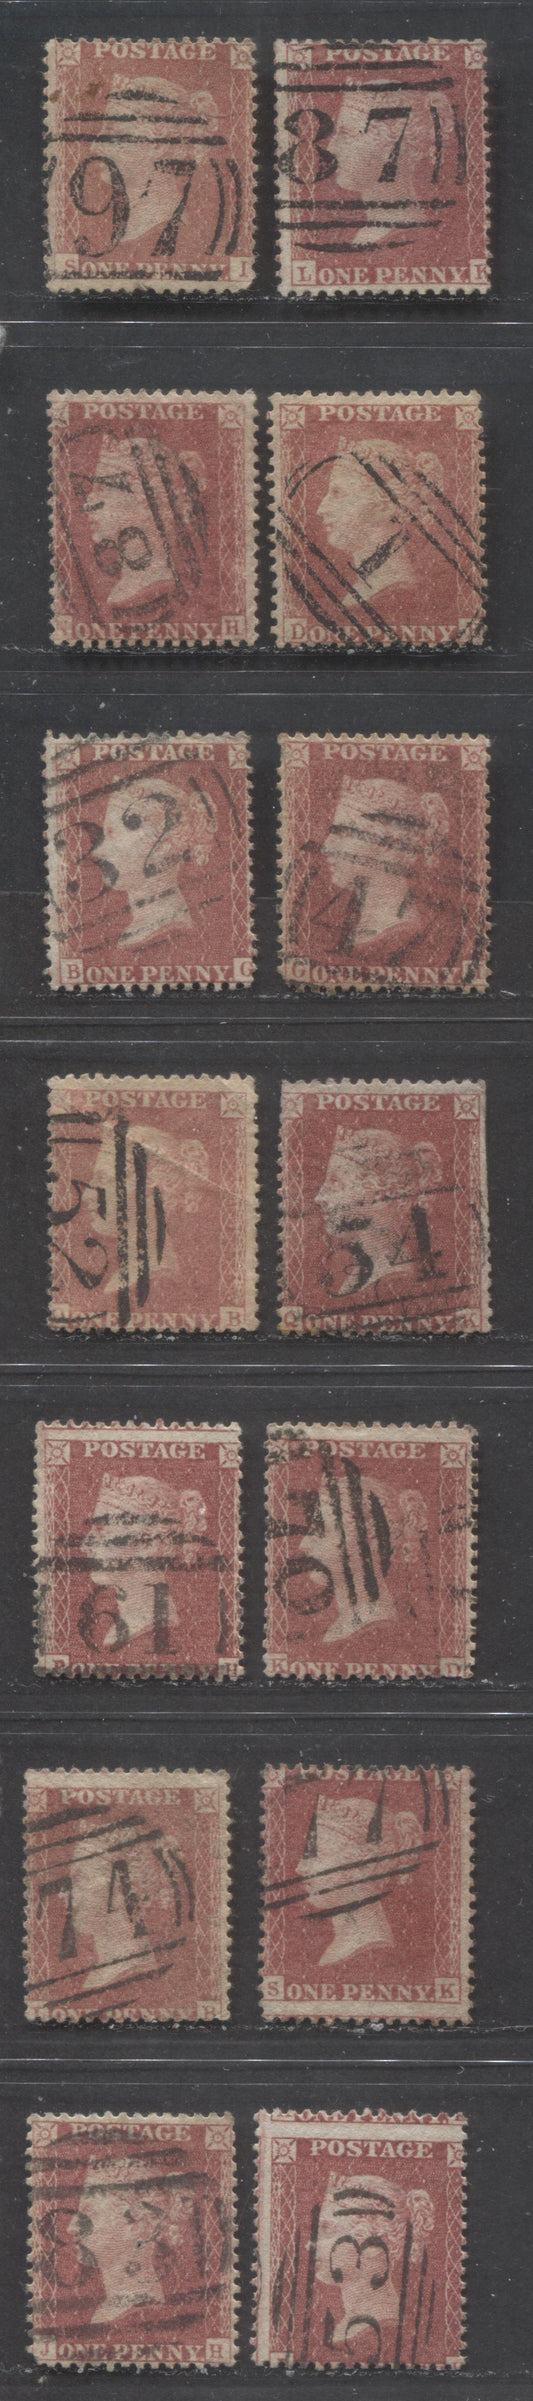 Lot  433 Great Britain - Barred Numeral Cancels For England & Wales: 1-99 SC#20 1d Rose red & Deep Rose Red 1857-1863 1d Red Stars, Large Crown, White Paper, Perf. 14 Issue, #1/#97, 14 Good & VG Used Singles, Estimated Value $16